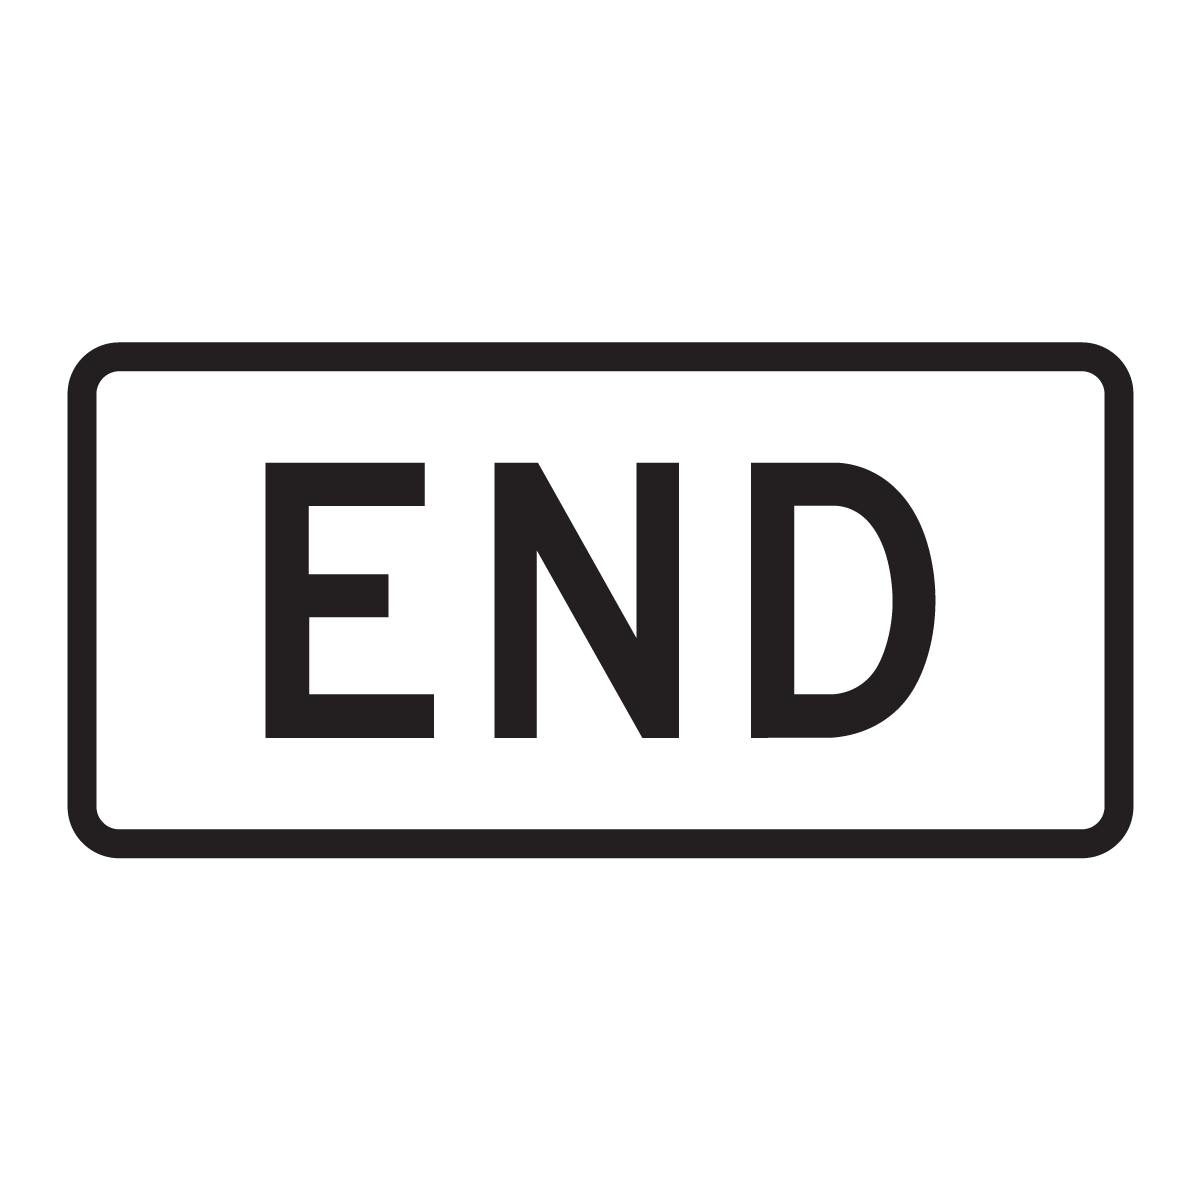 M4-6 End